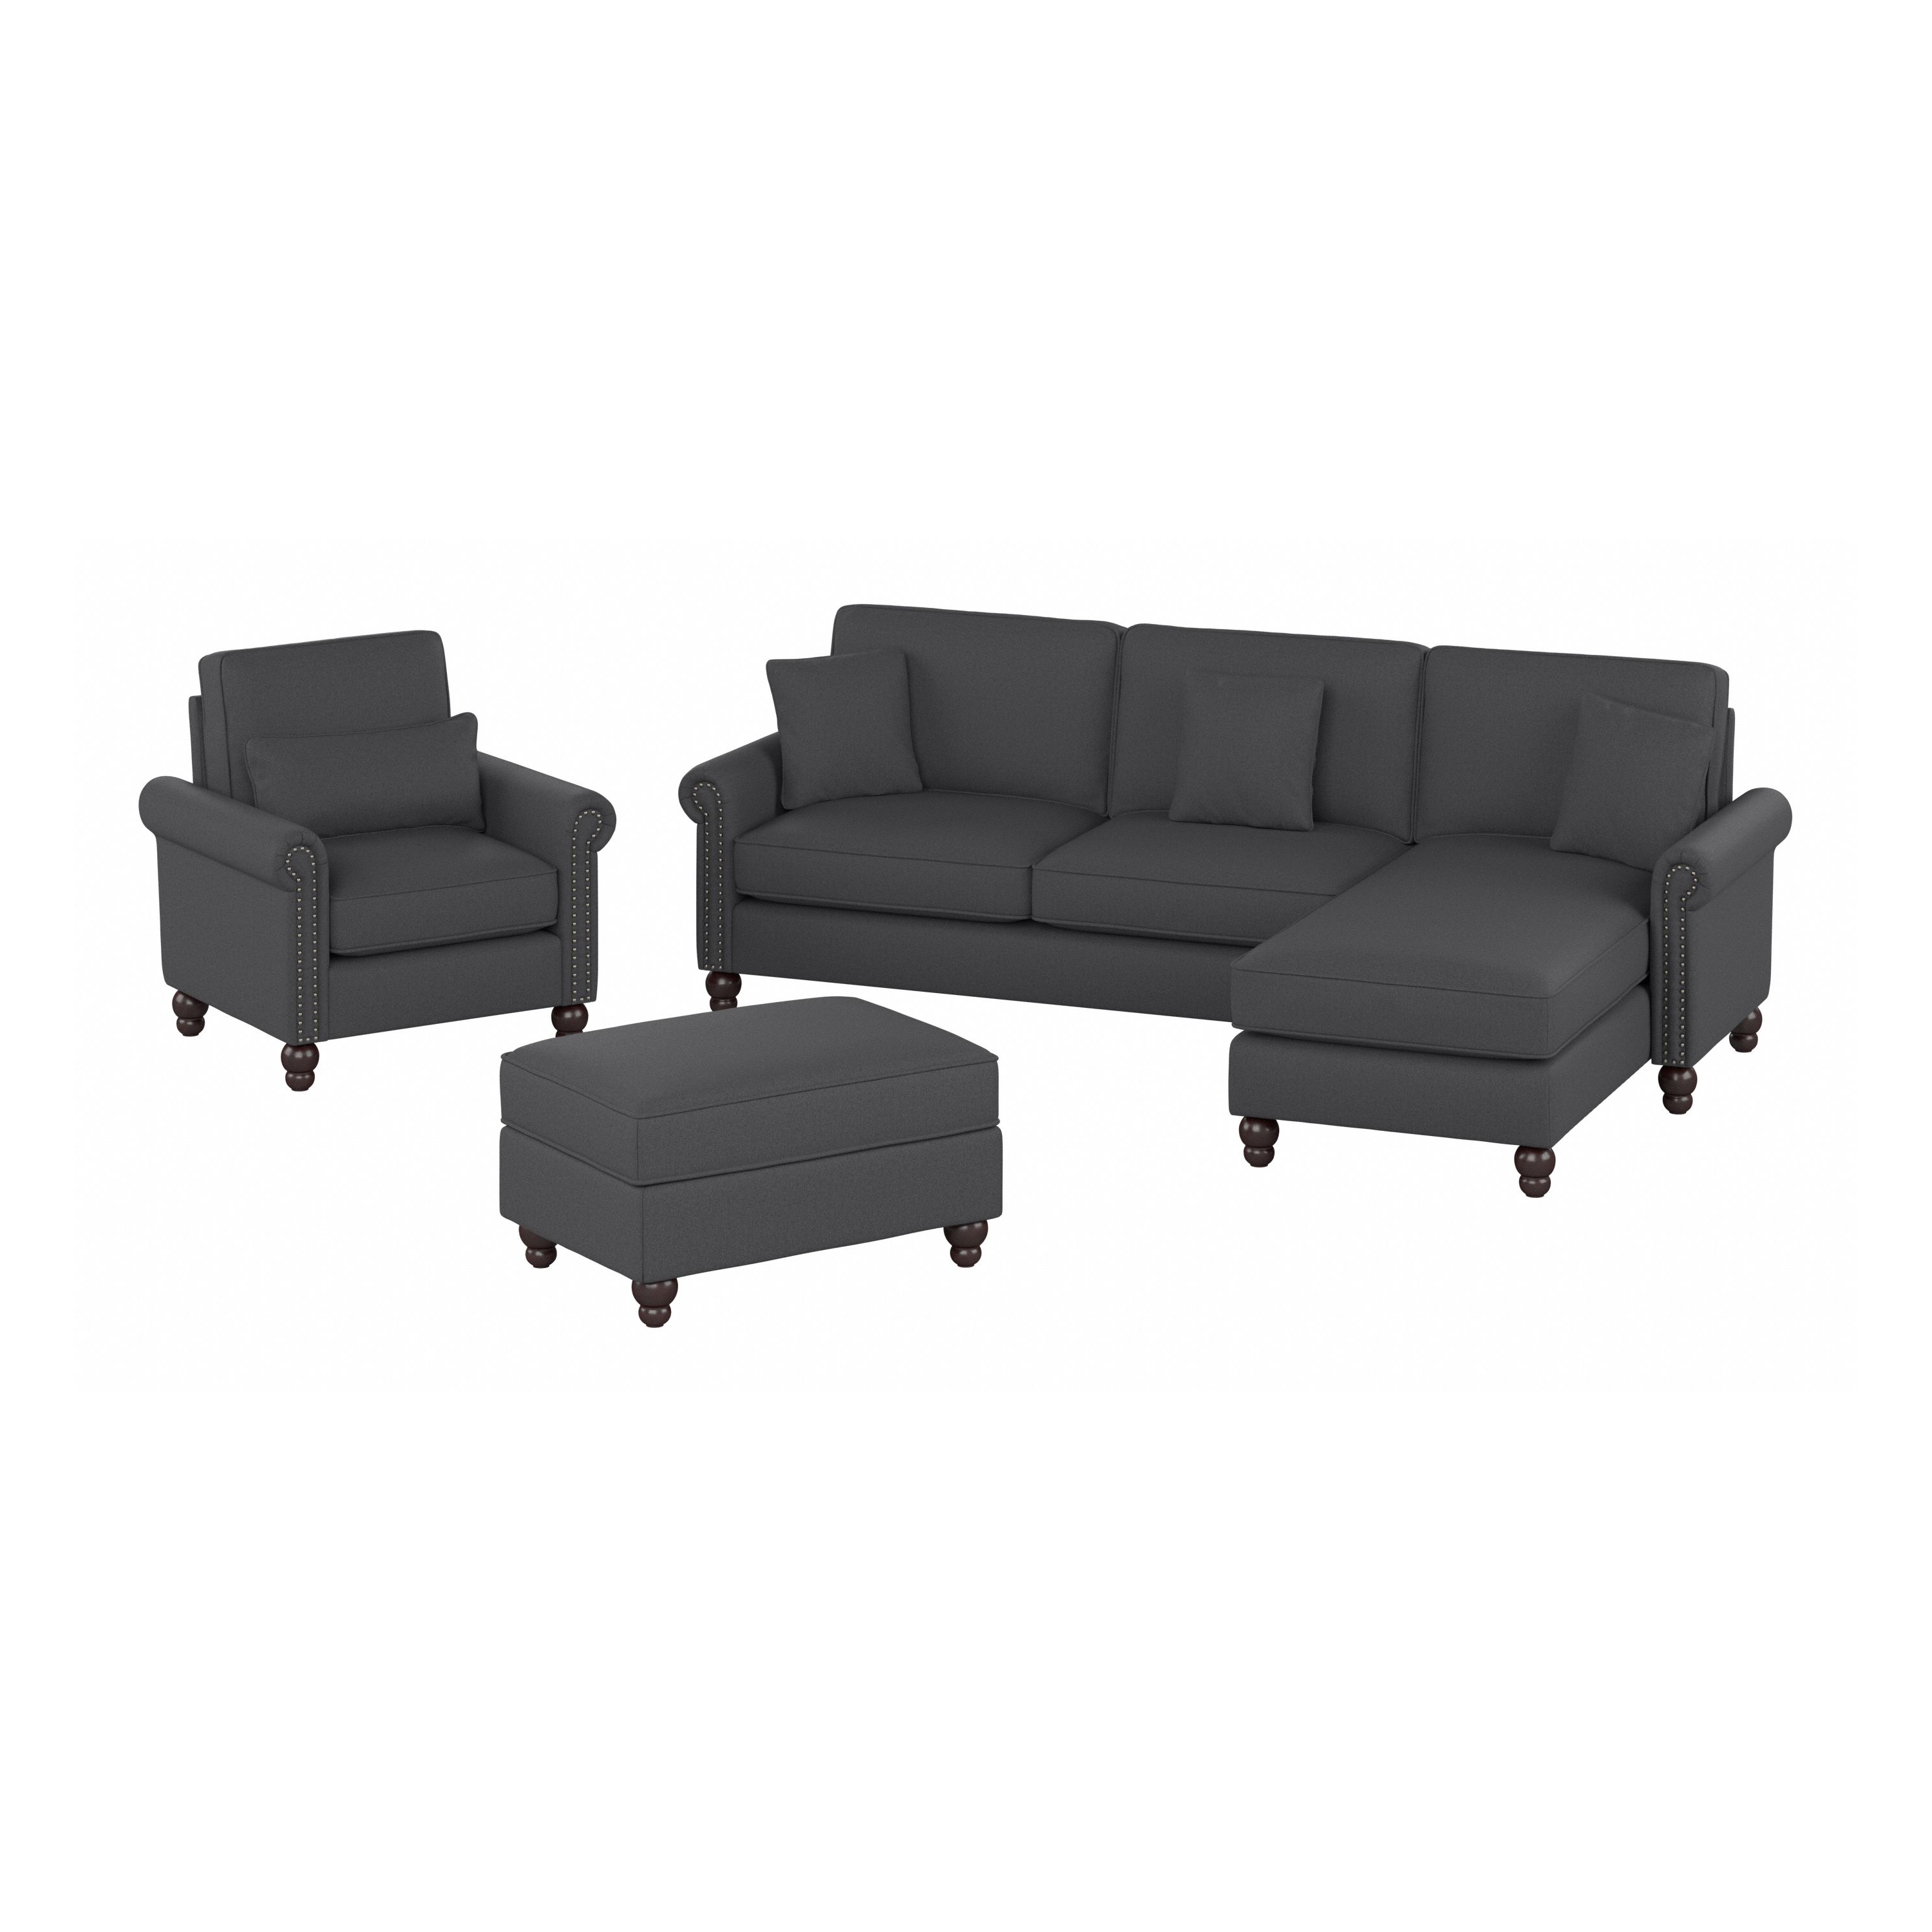 Shop Bush Furniture Coventry 102W Sectional Couch with Reversible Chaise Lounge, Accent Chair, and Ottoman 02 CVN021CGH #color_charcoal gray herringbone fabr